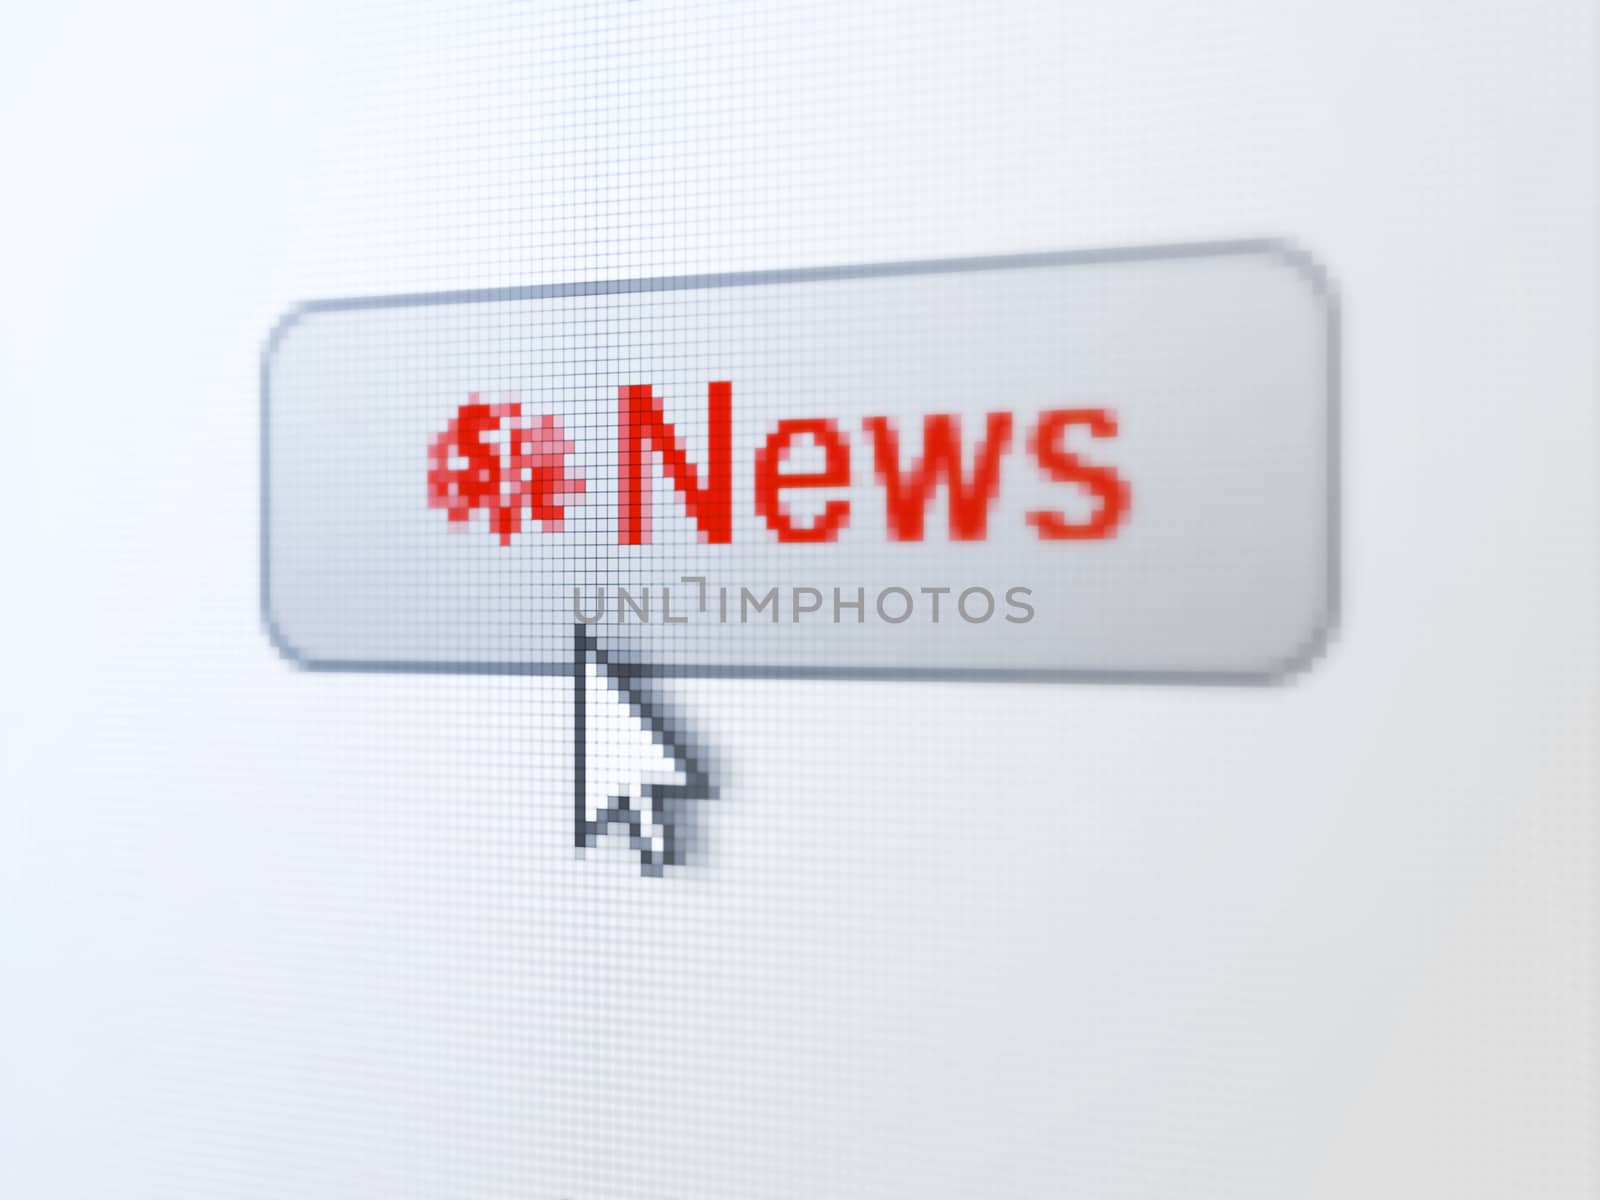 News concept: pixelated words News and Finance Symbol icon on button withArrow cursor on digital computer screen background, 3d render